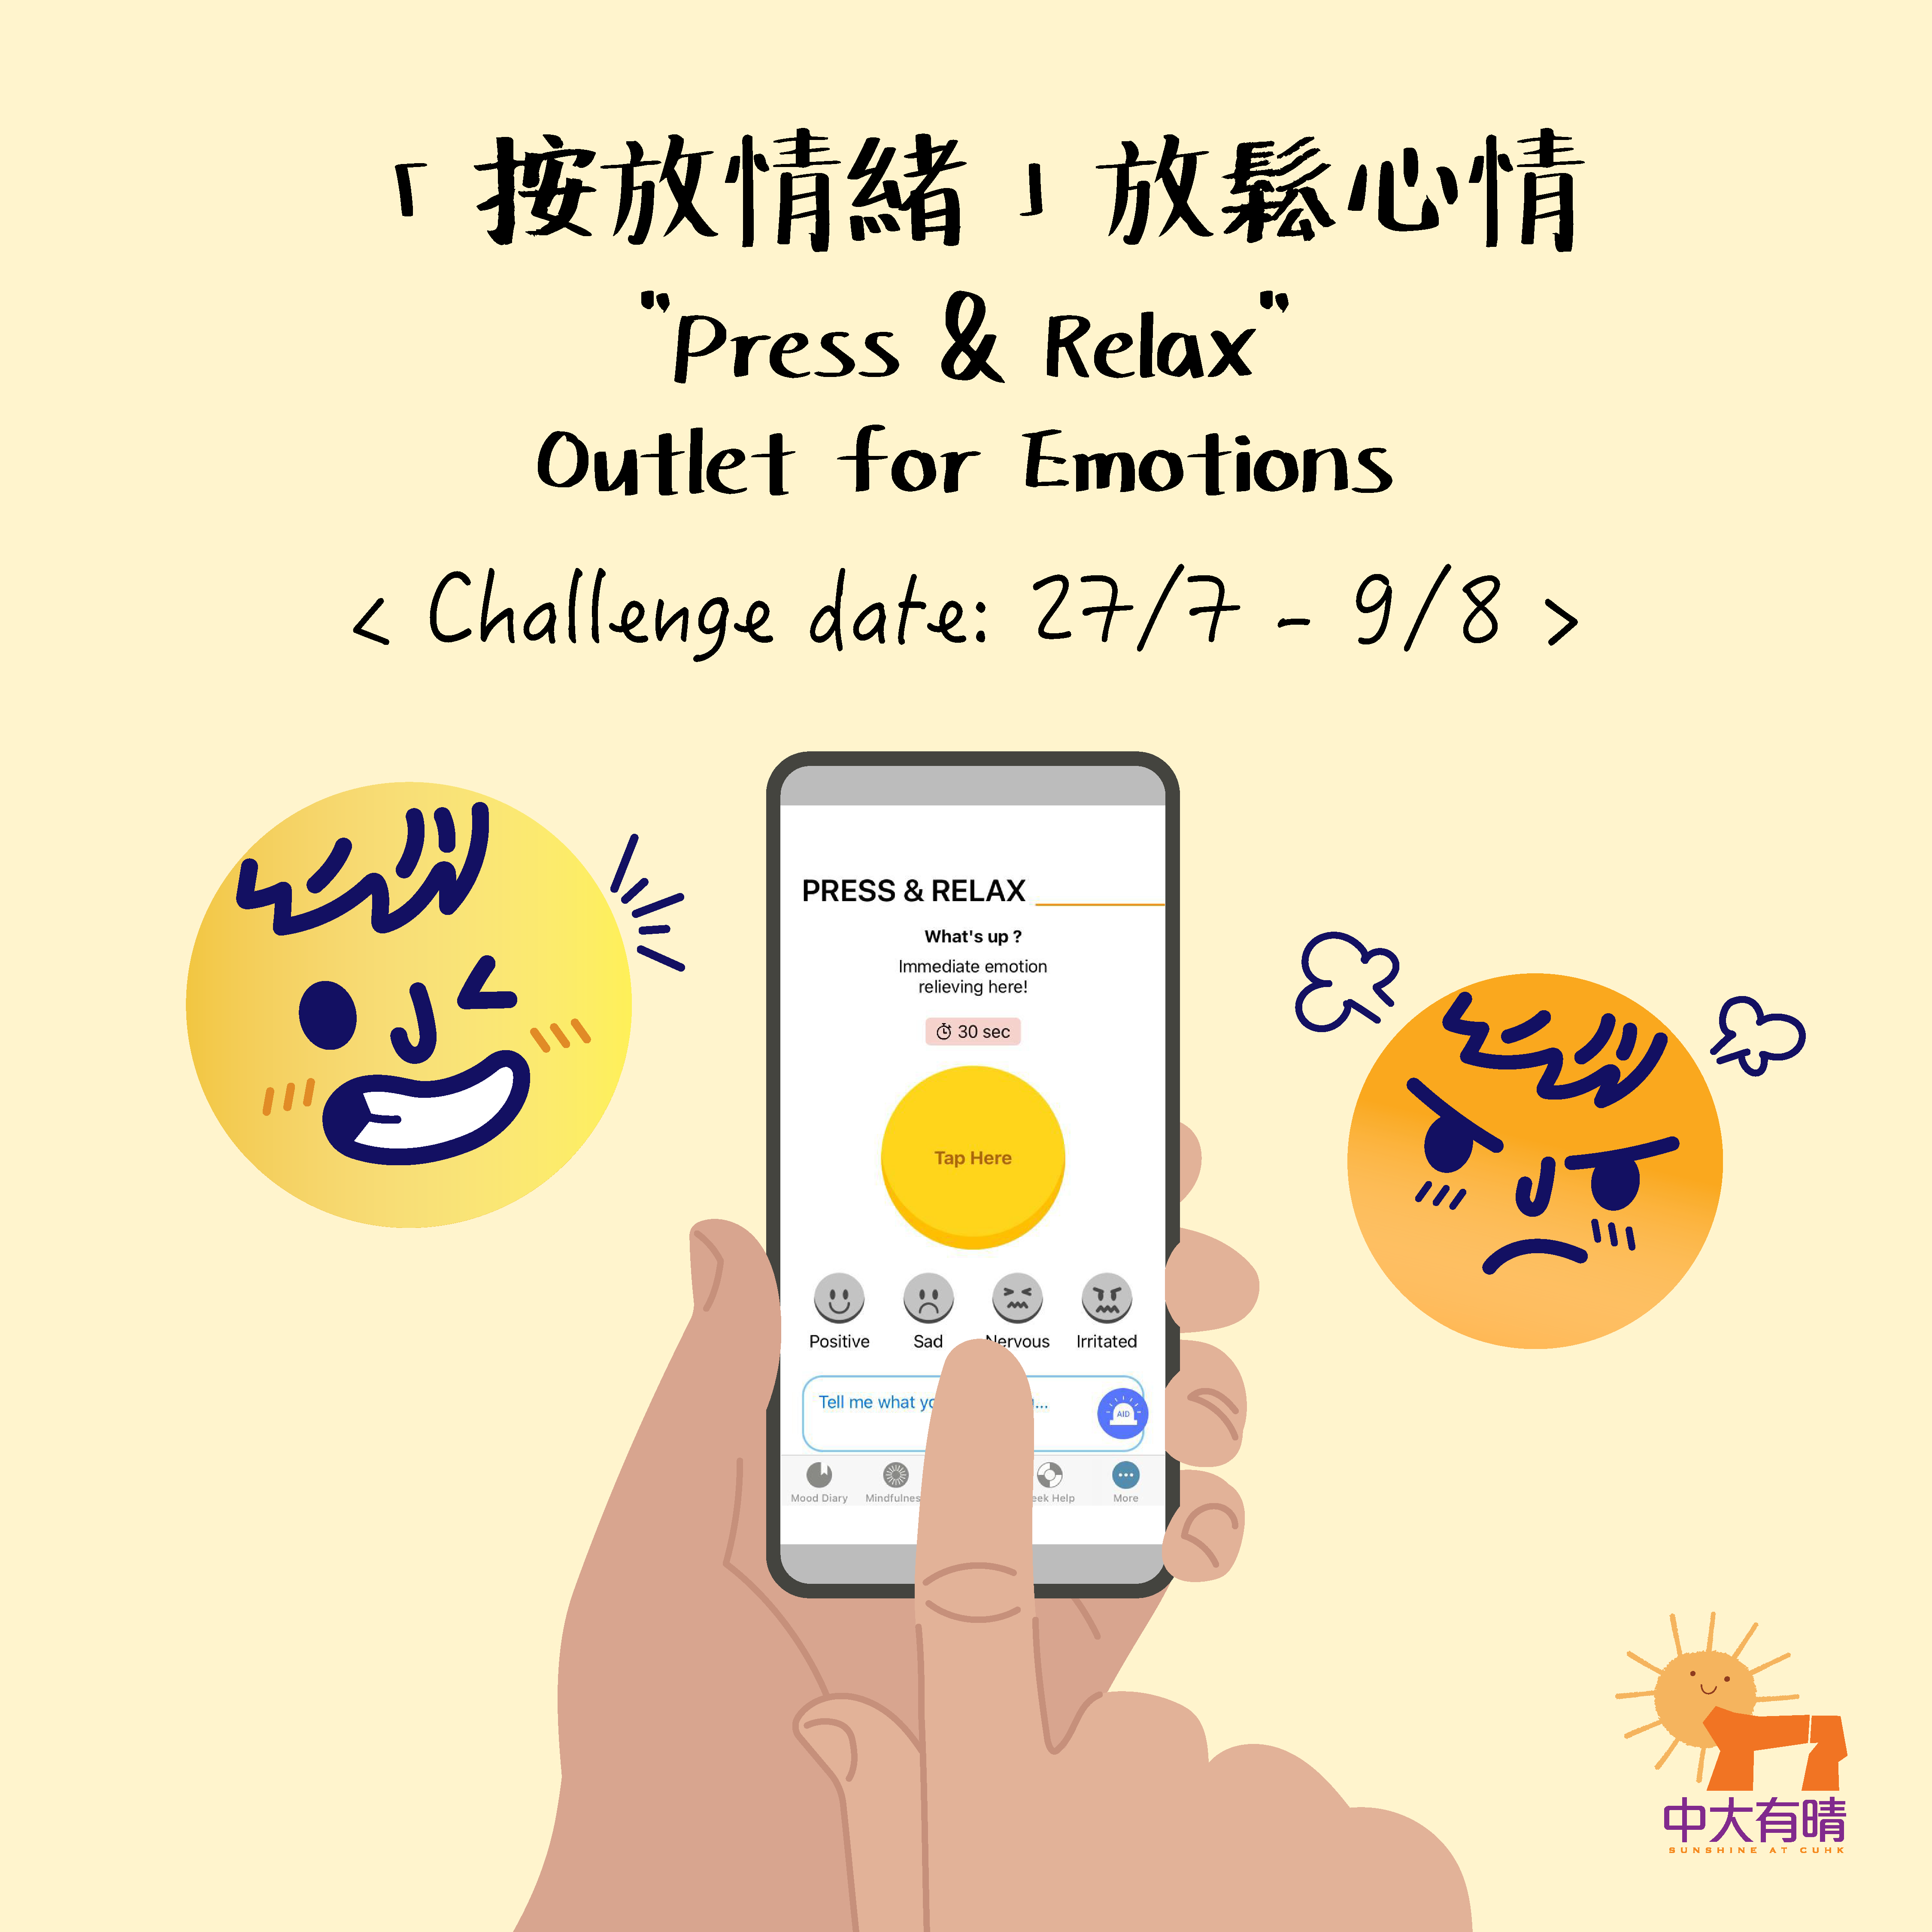 Find outlet for emotions through new function in Sunshine@CUHK Mobile App “Press & Relax”